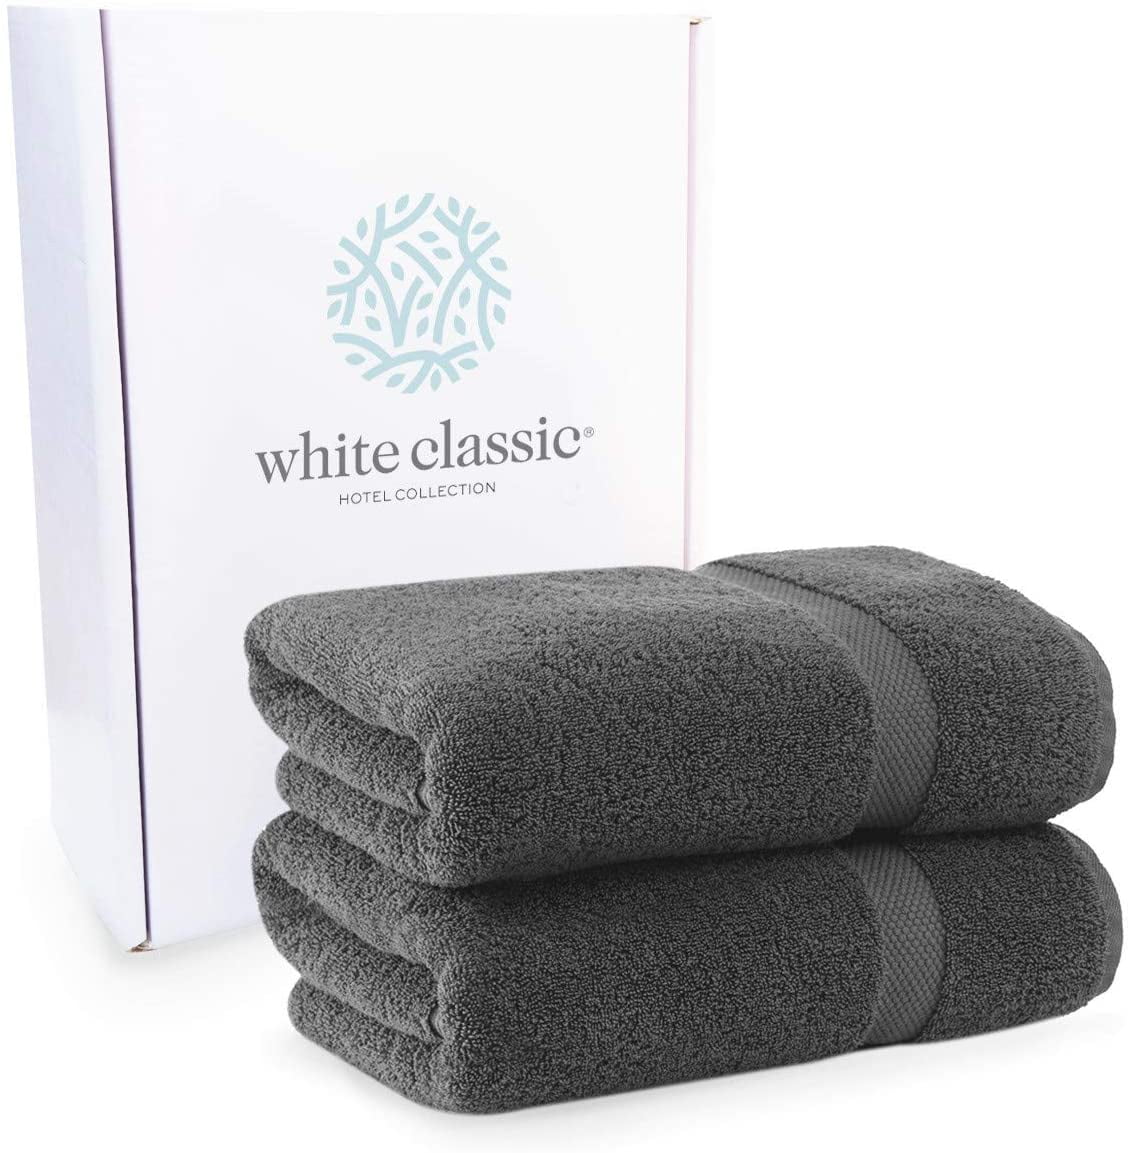 White Classic Luxury Bath Towels - Cotton Hotel spa Towel 27x54 4-Pack White-Grey  